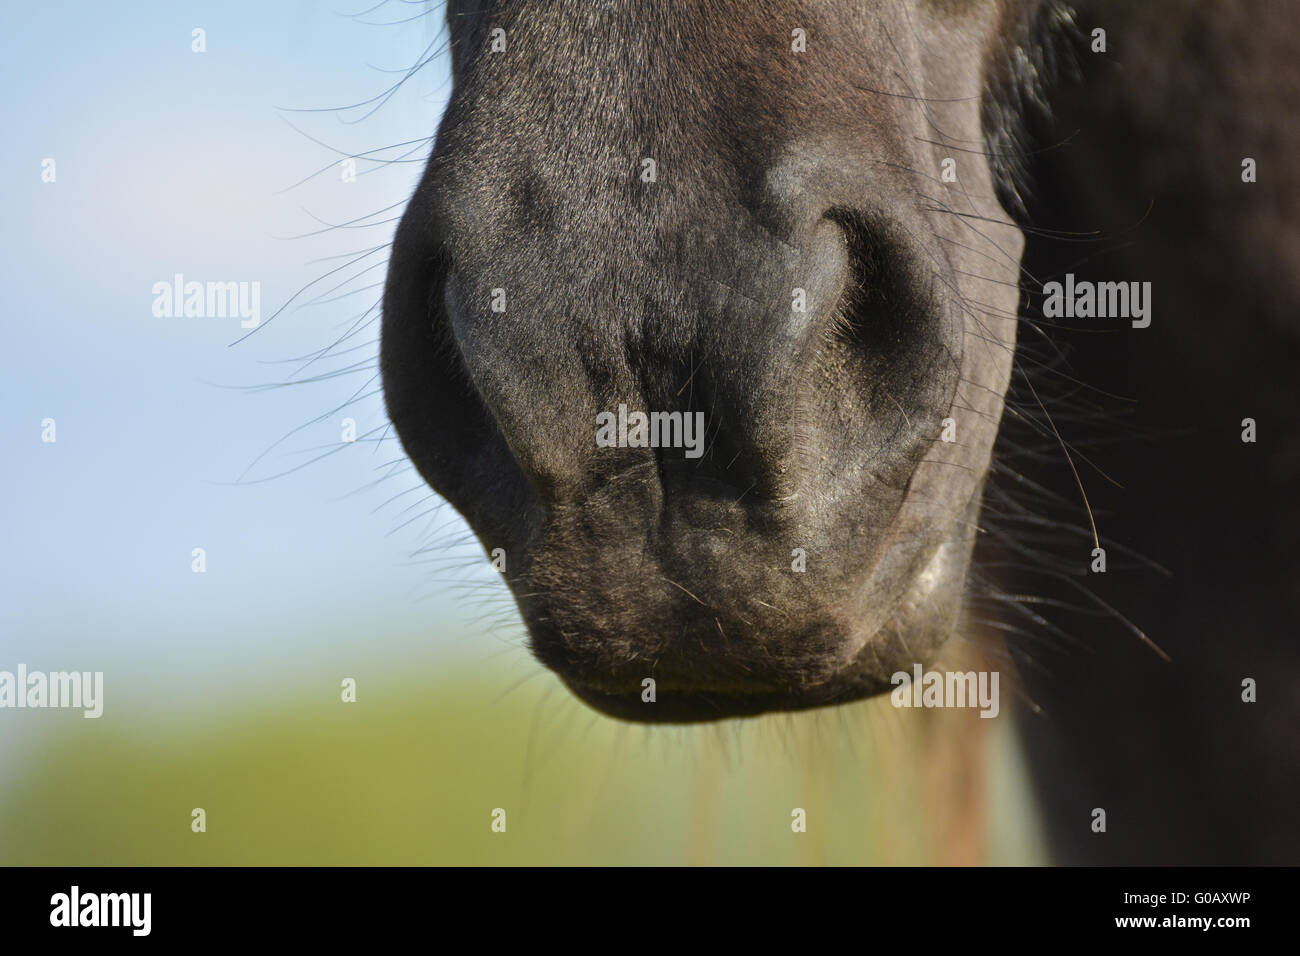 Nose and mouth of a horse Stock Photo